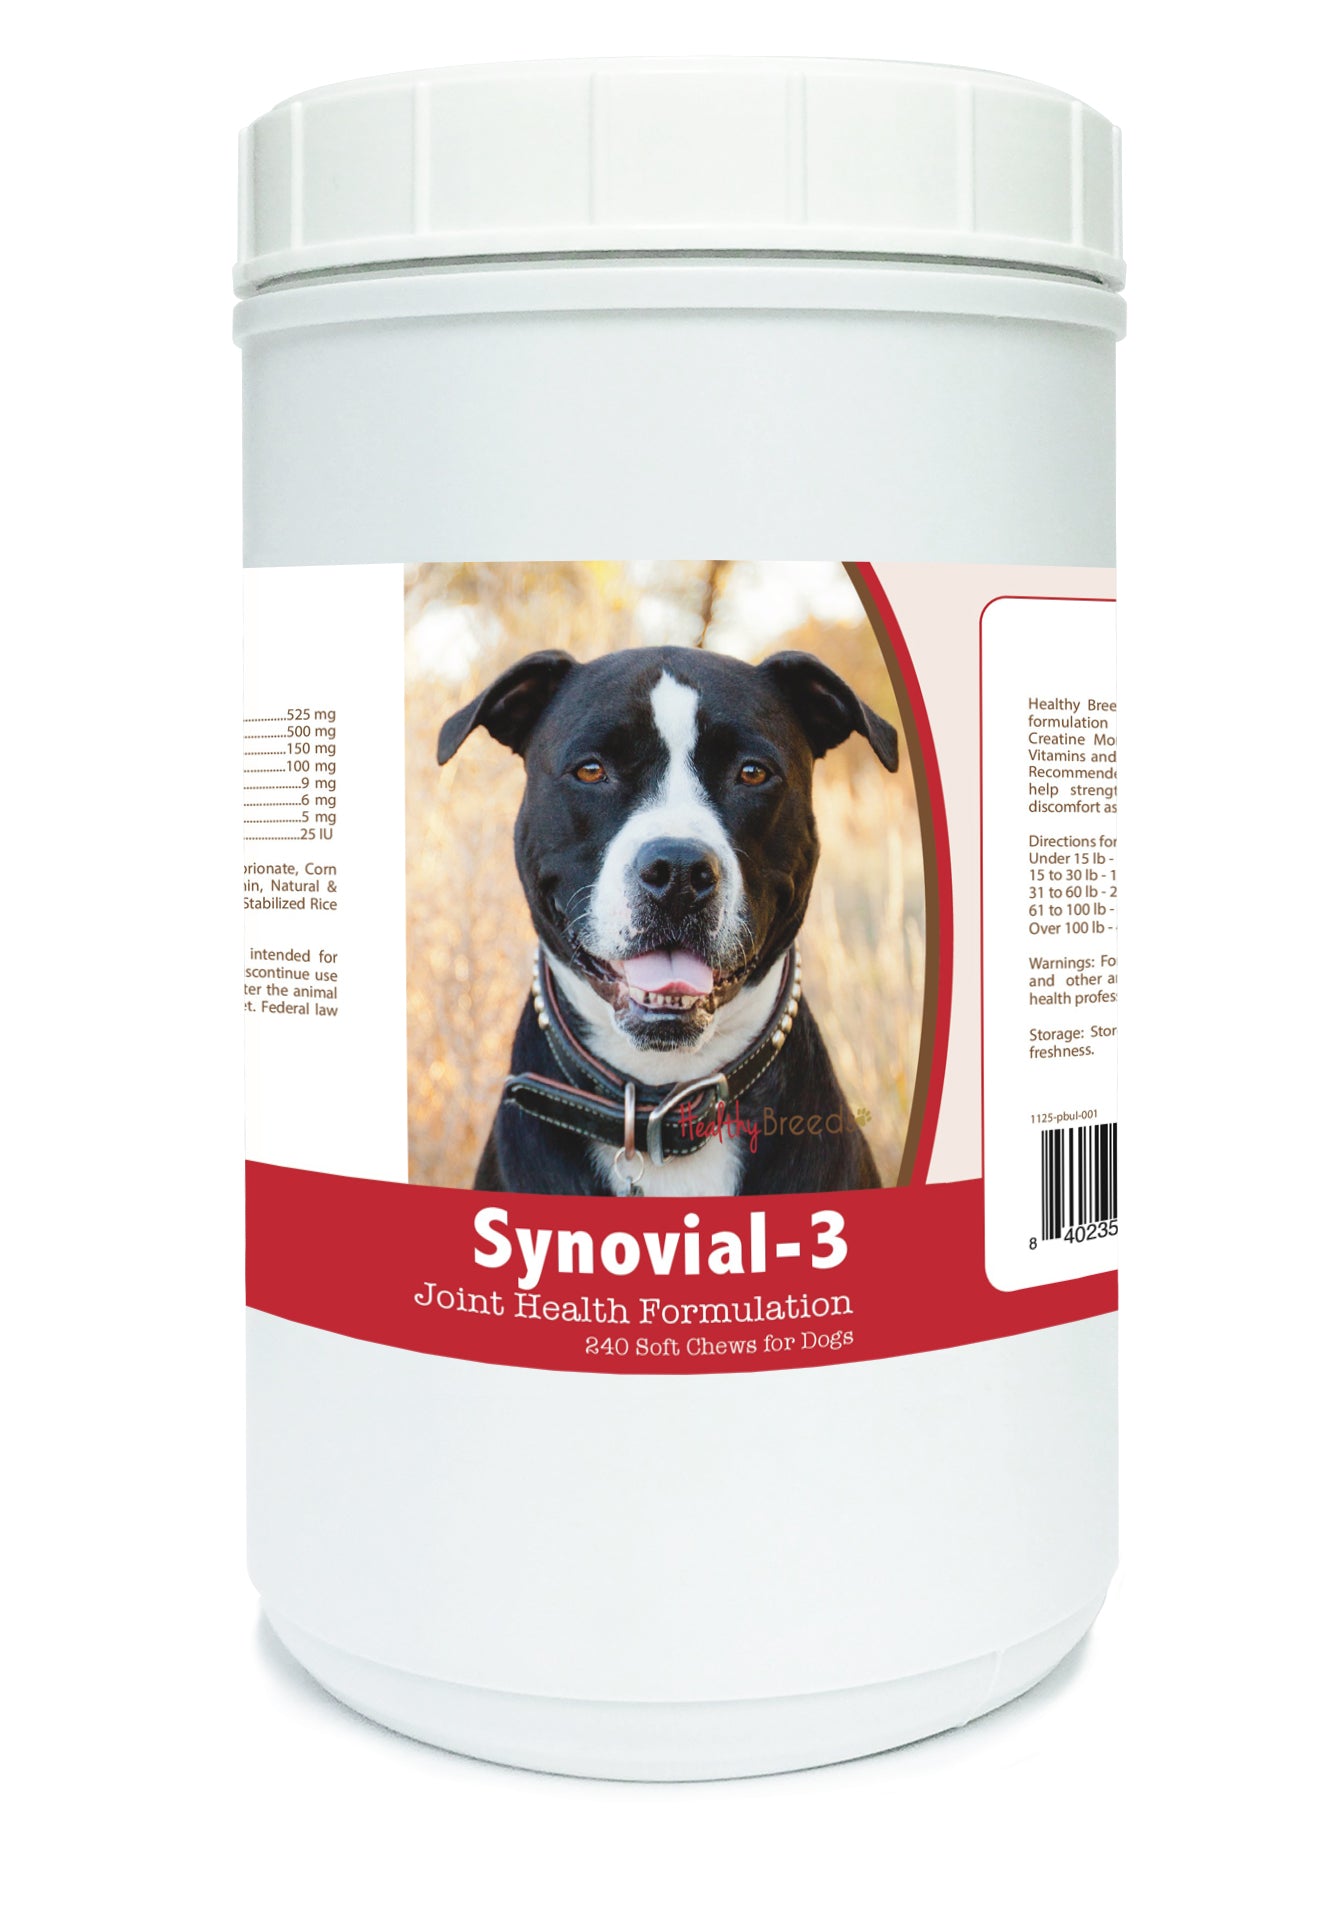 Pit Bull Synovial-3 Joint Health Formulation Soft Chews 240 Count